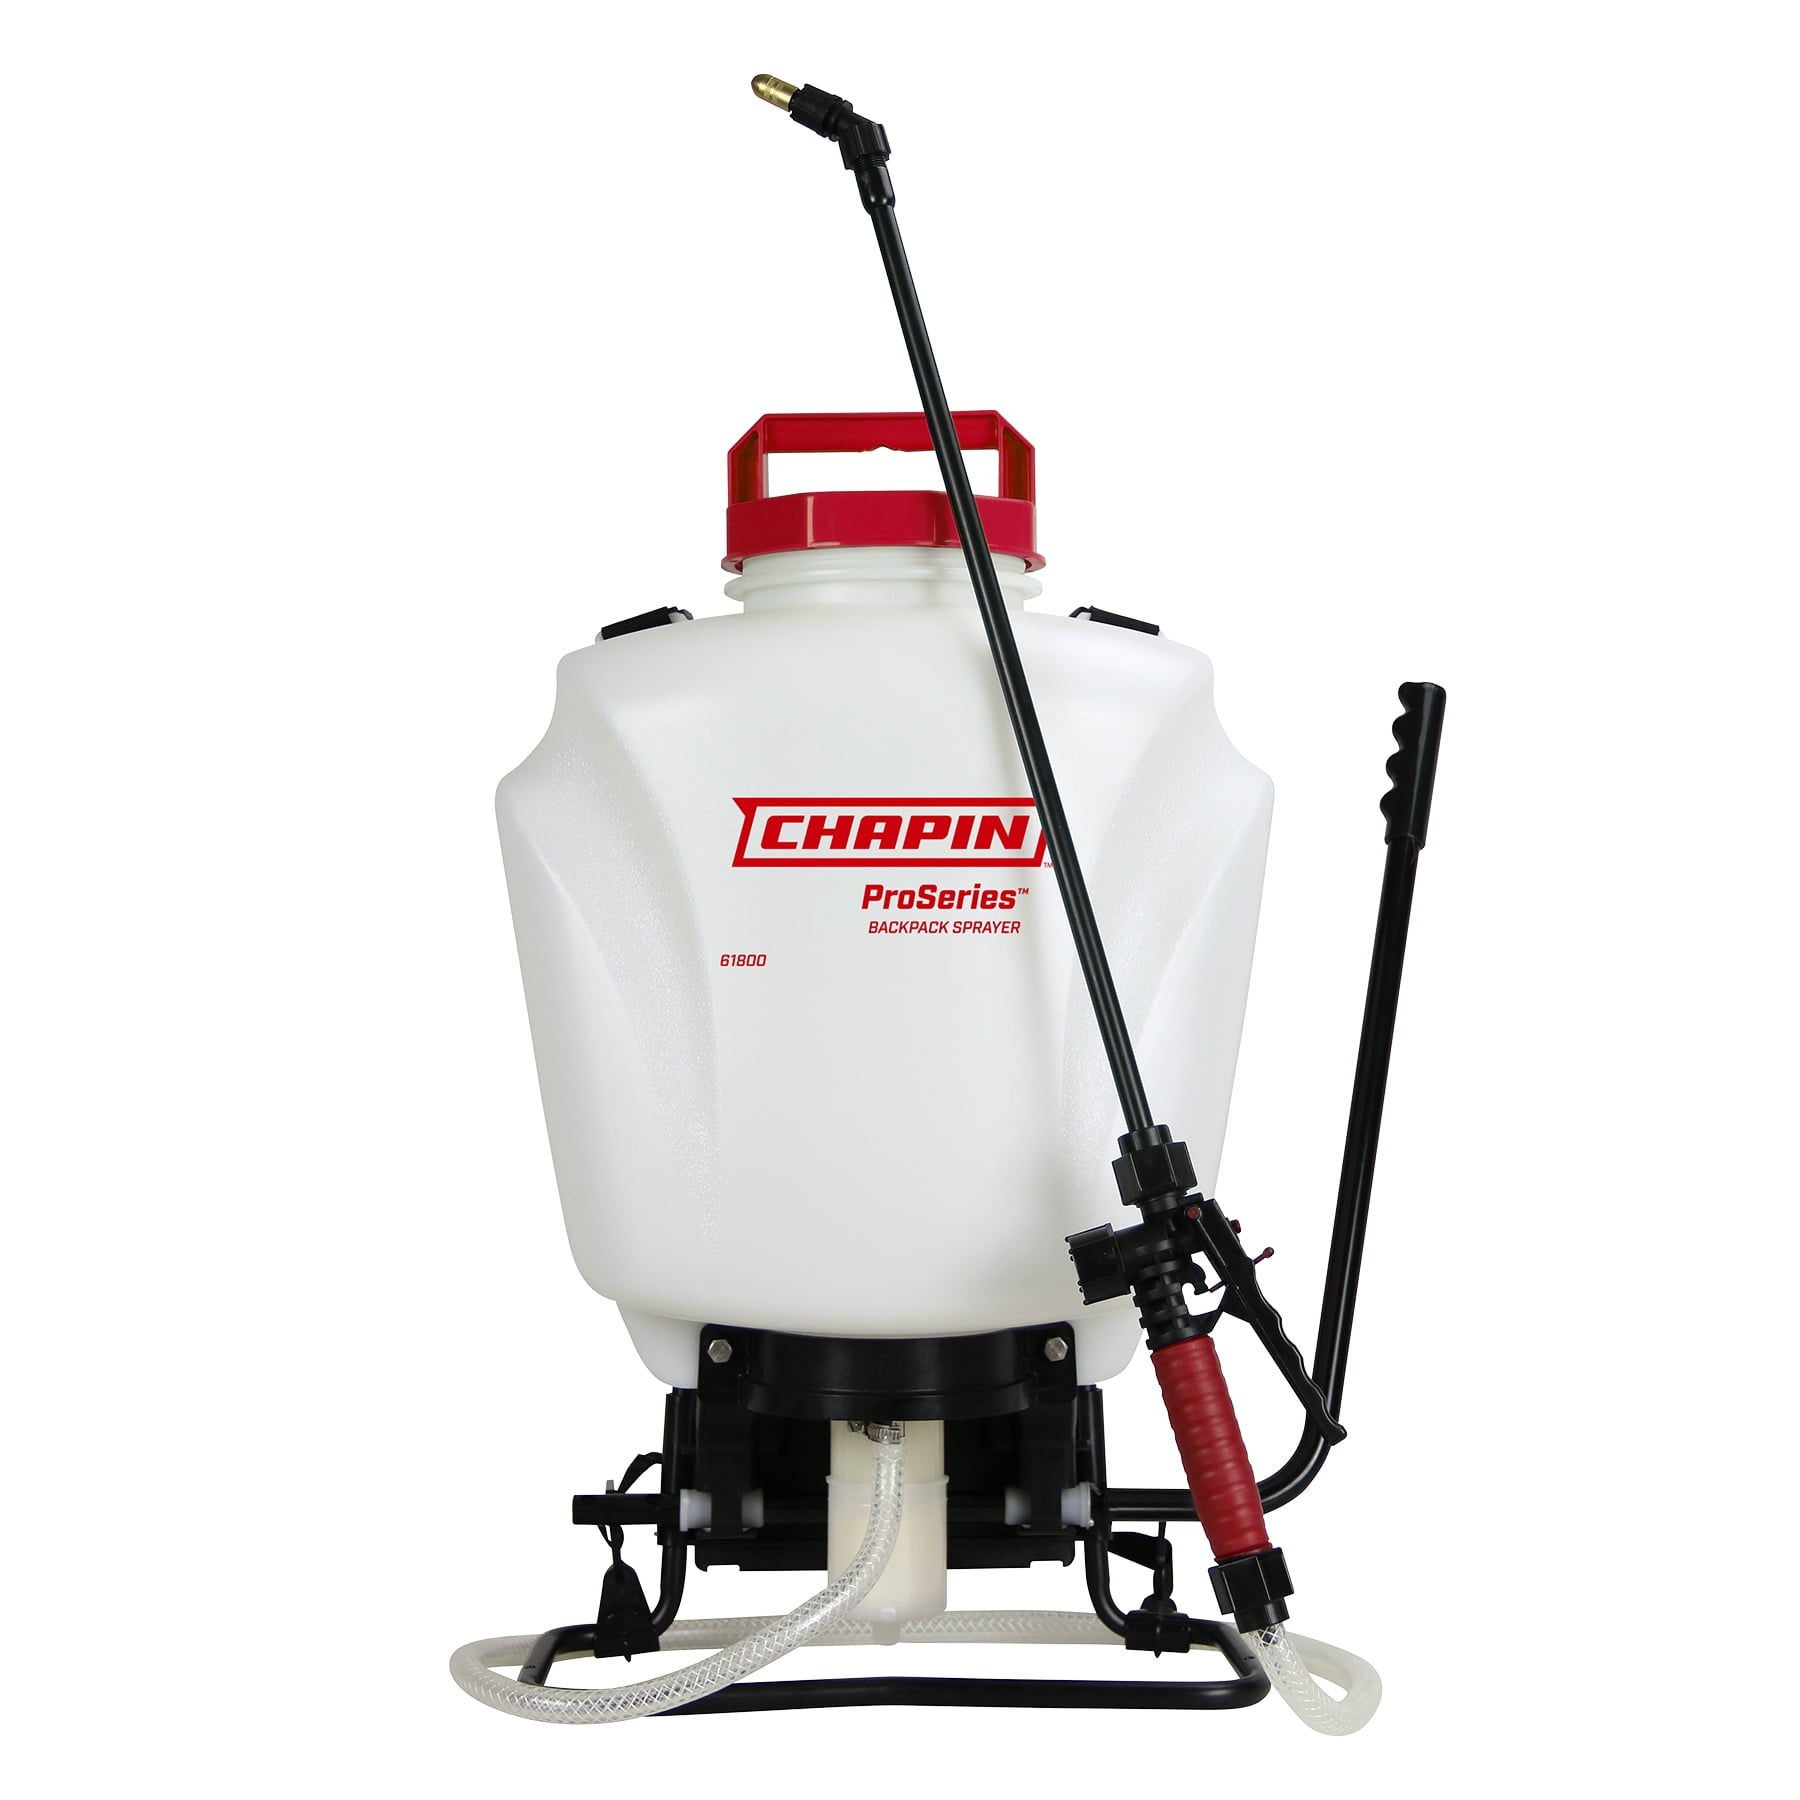 Herbicides & Insecticides Smith Contractor 1 Gallon Sprayer  for Weed Killers